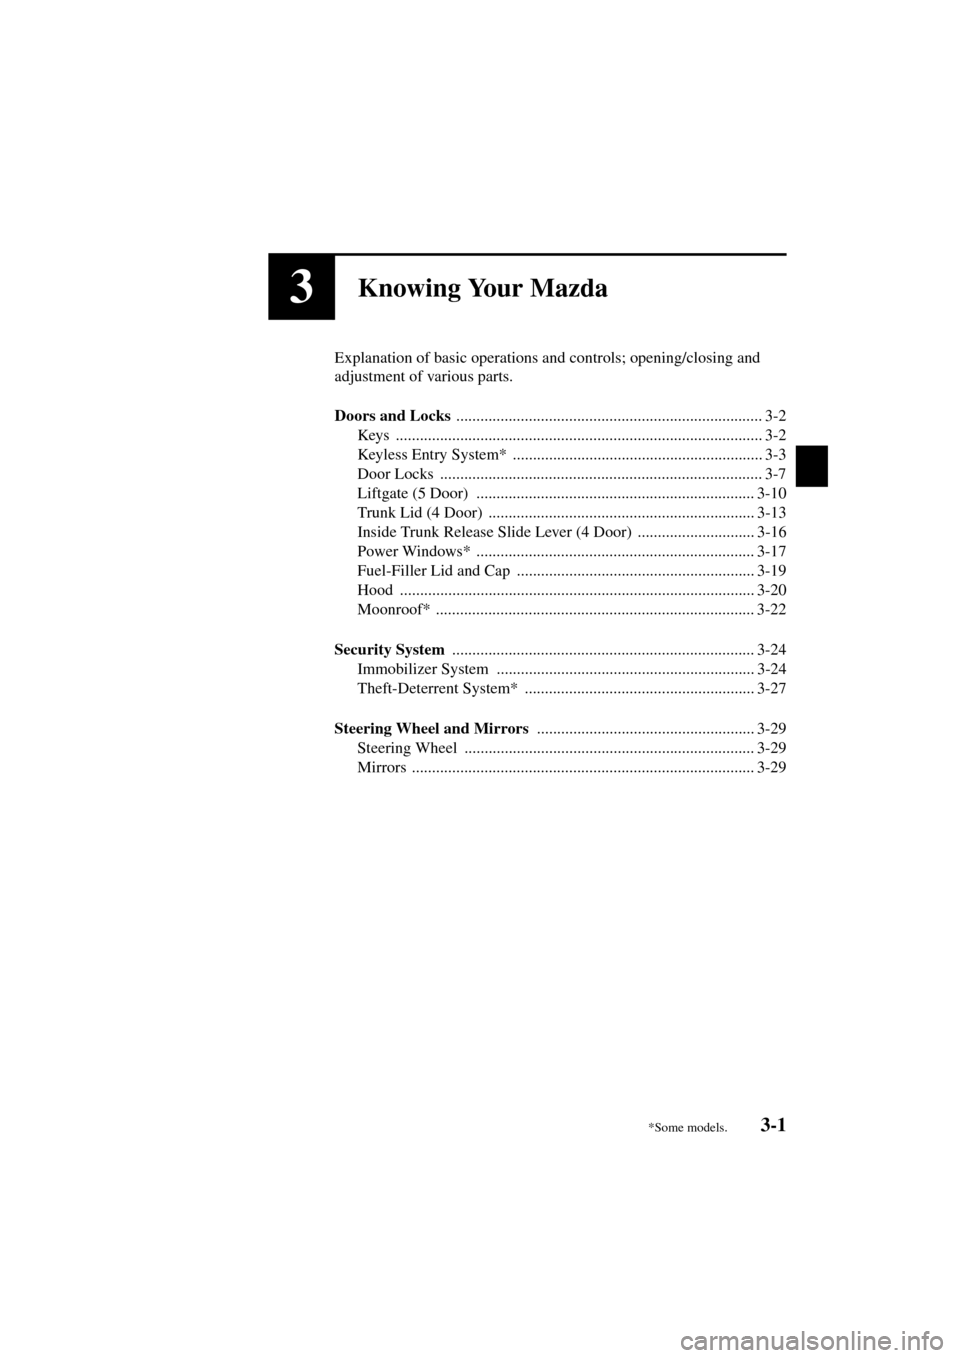 MAZDA MODEL 3 HATCHBACK 2004  Owners Manual (in English) 3-1
Form No. 8S18-EA-03I
3Knowing Your Mazda
Explanation of basic operations and controls; opening/closing and 
adjustment of various parts.
Doors and Locks 
..........................................